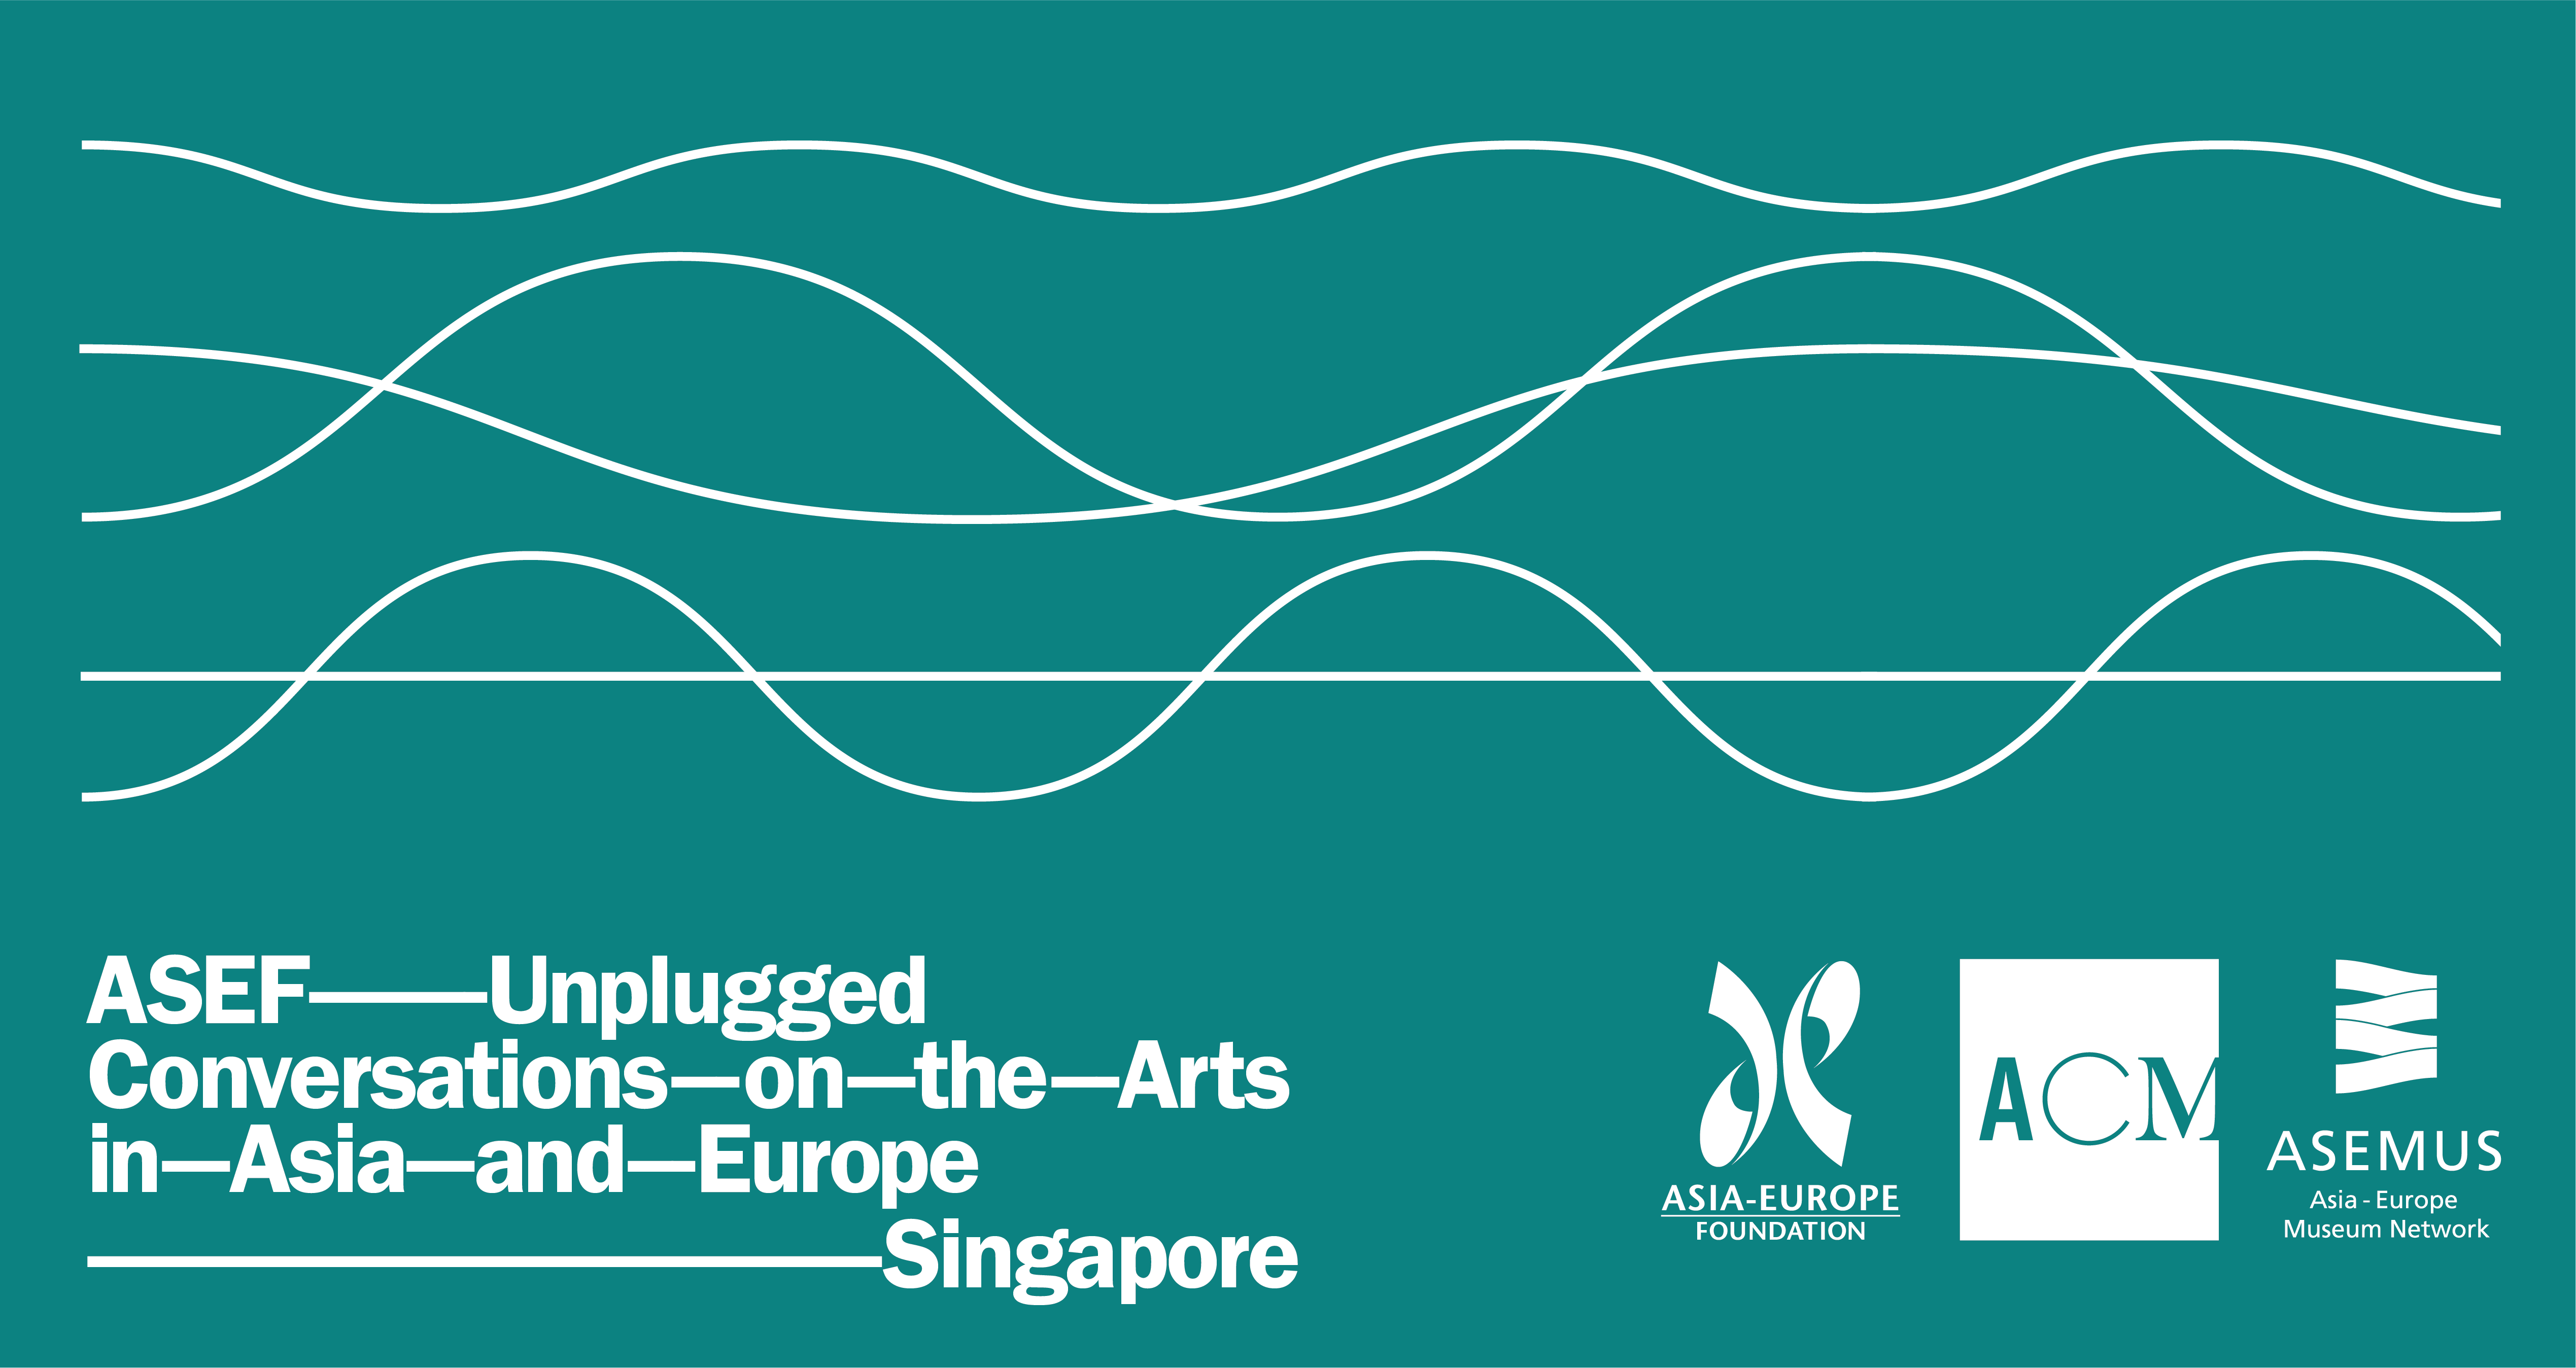 ASEF Unplugged at Asian Civilisations Museum